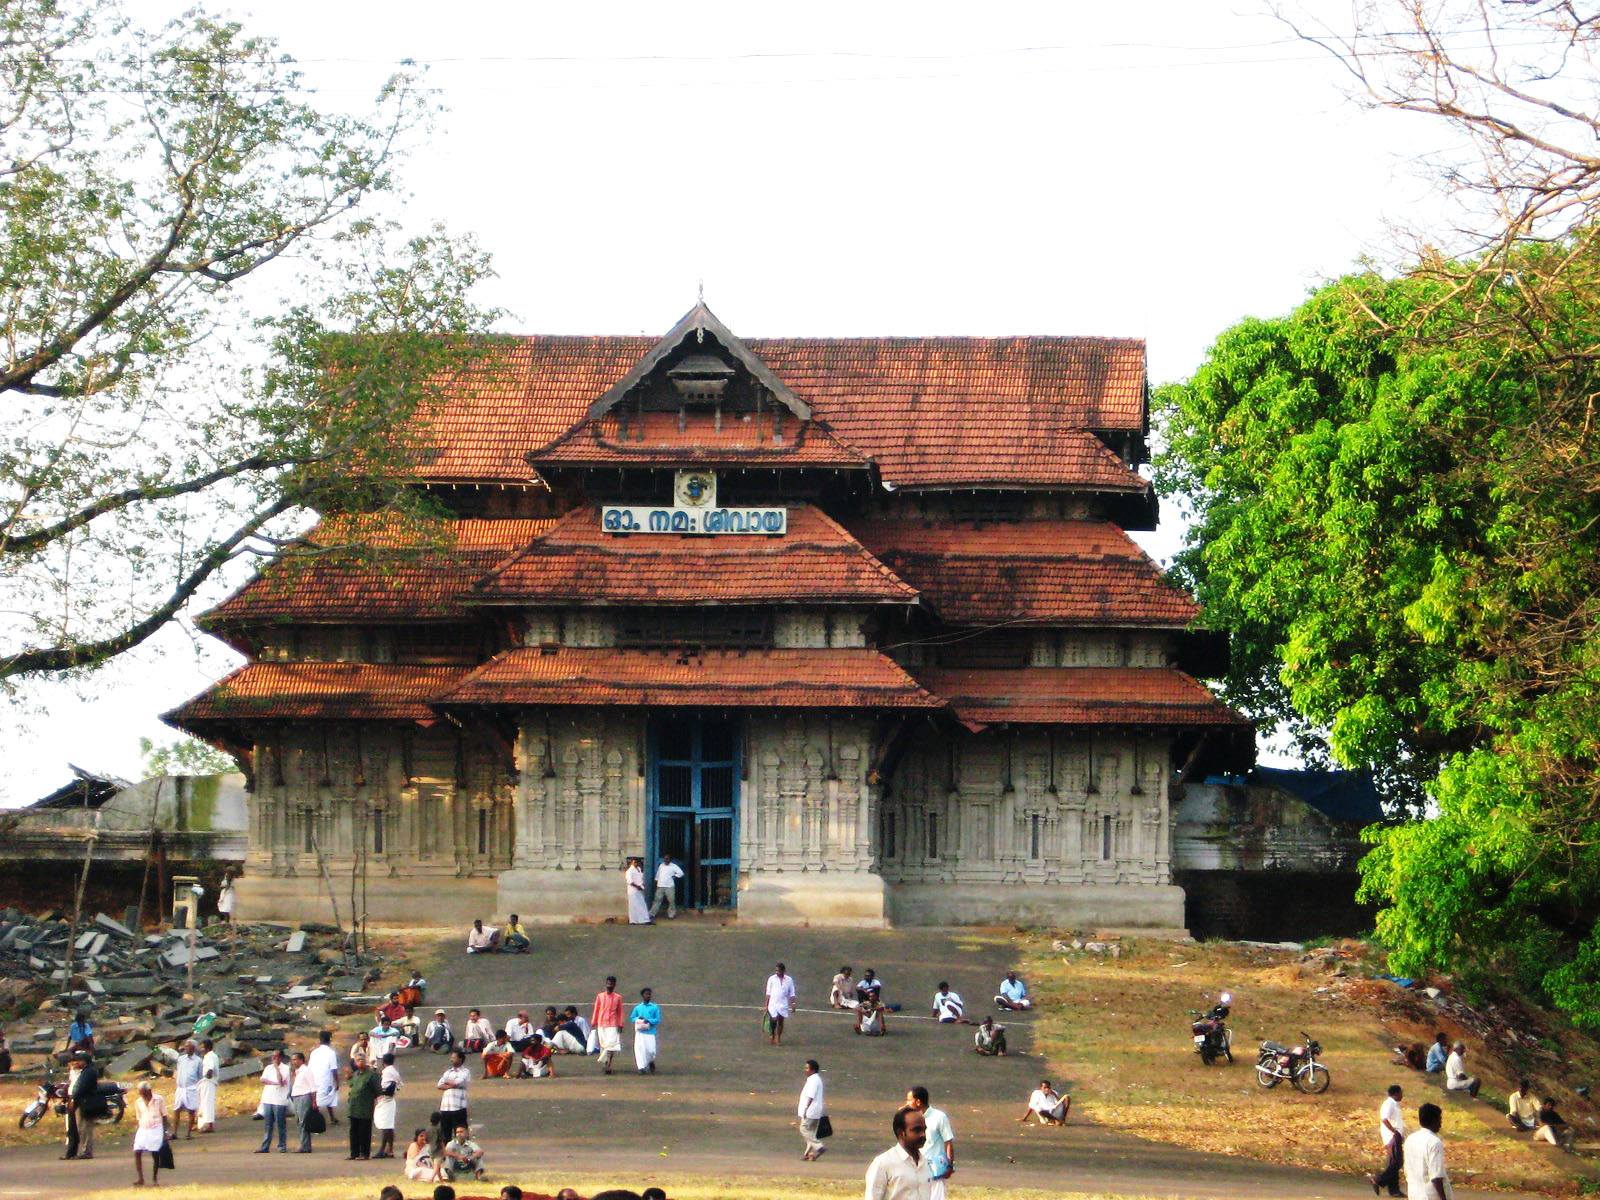 ABOUT VADAKKUNNATHAN TEMPLE - TEMPLE KNOWLEDGE